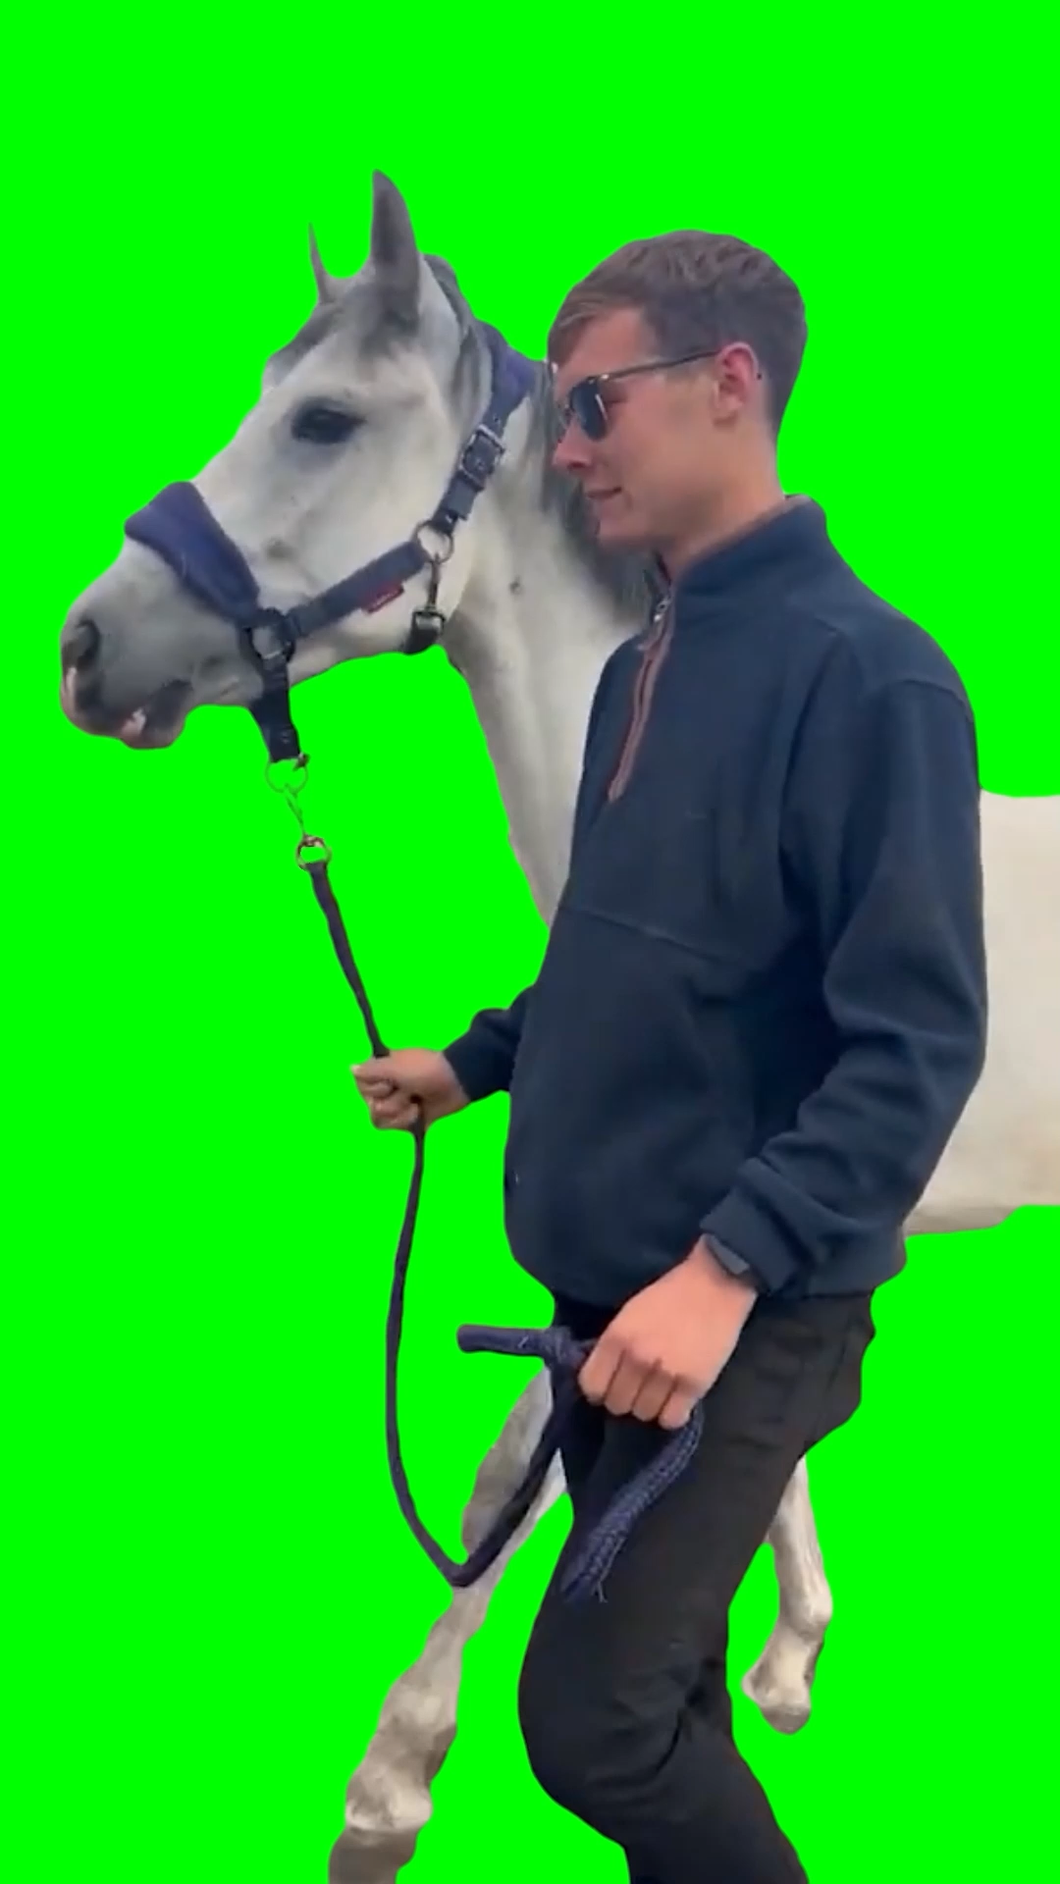 Scared Horse Drags Man (Green Screen)